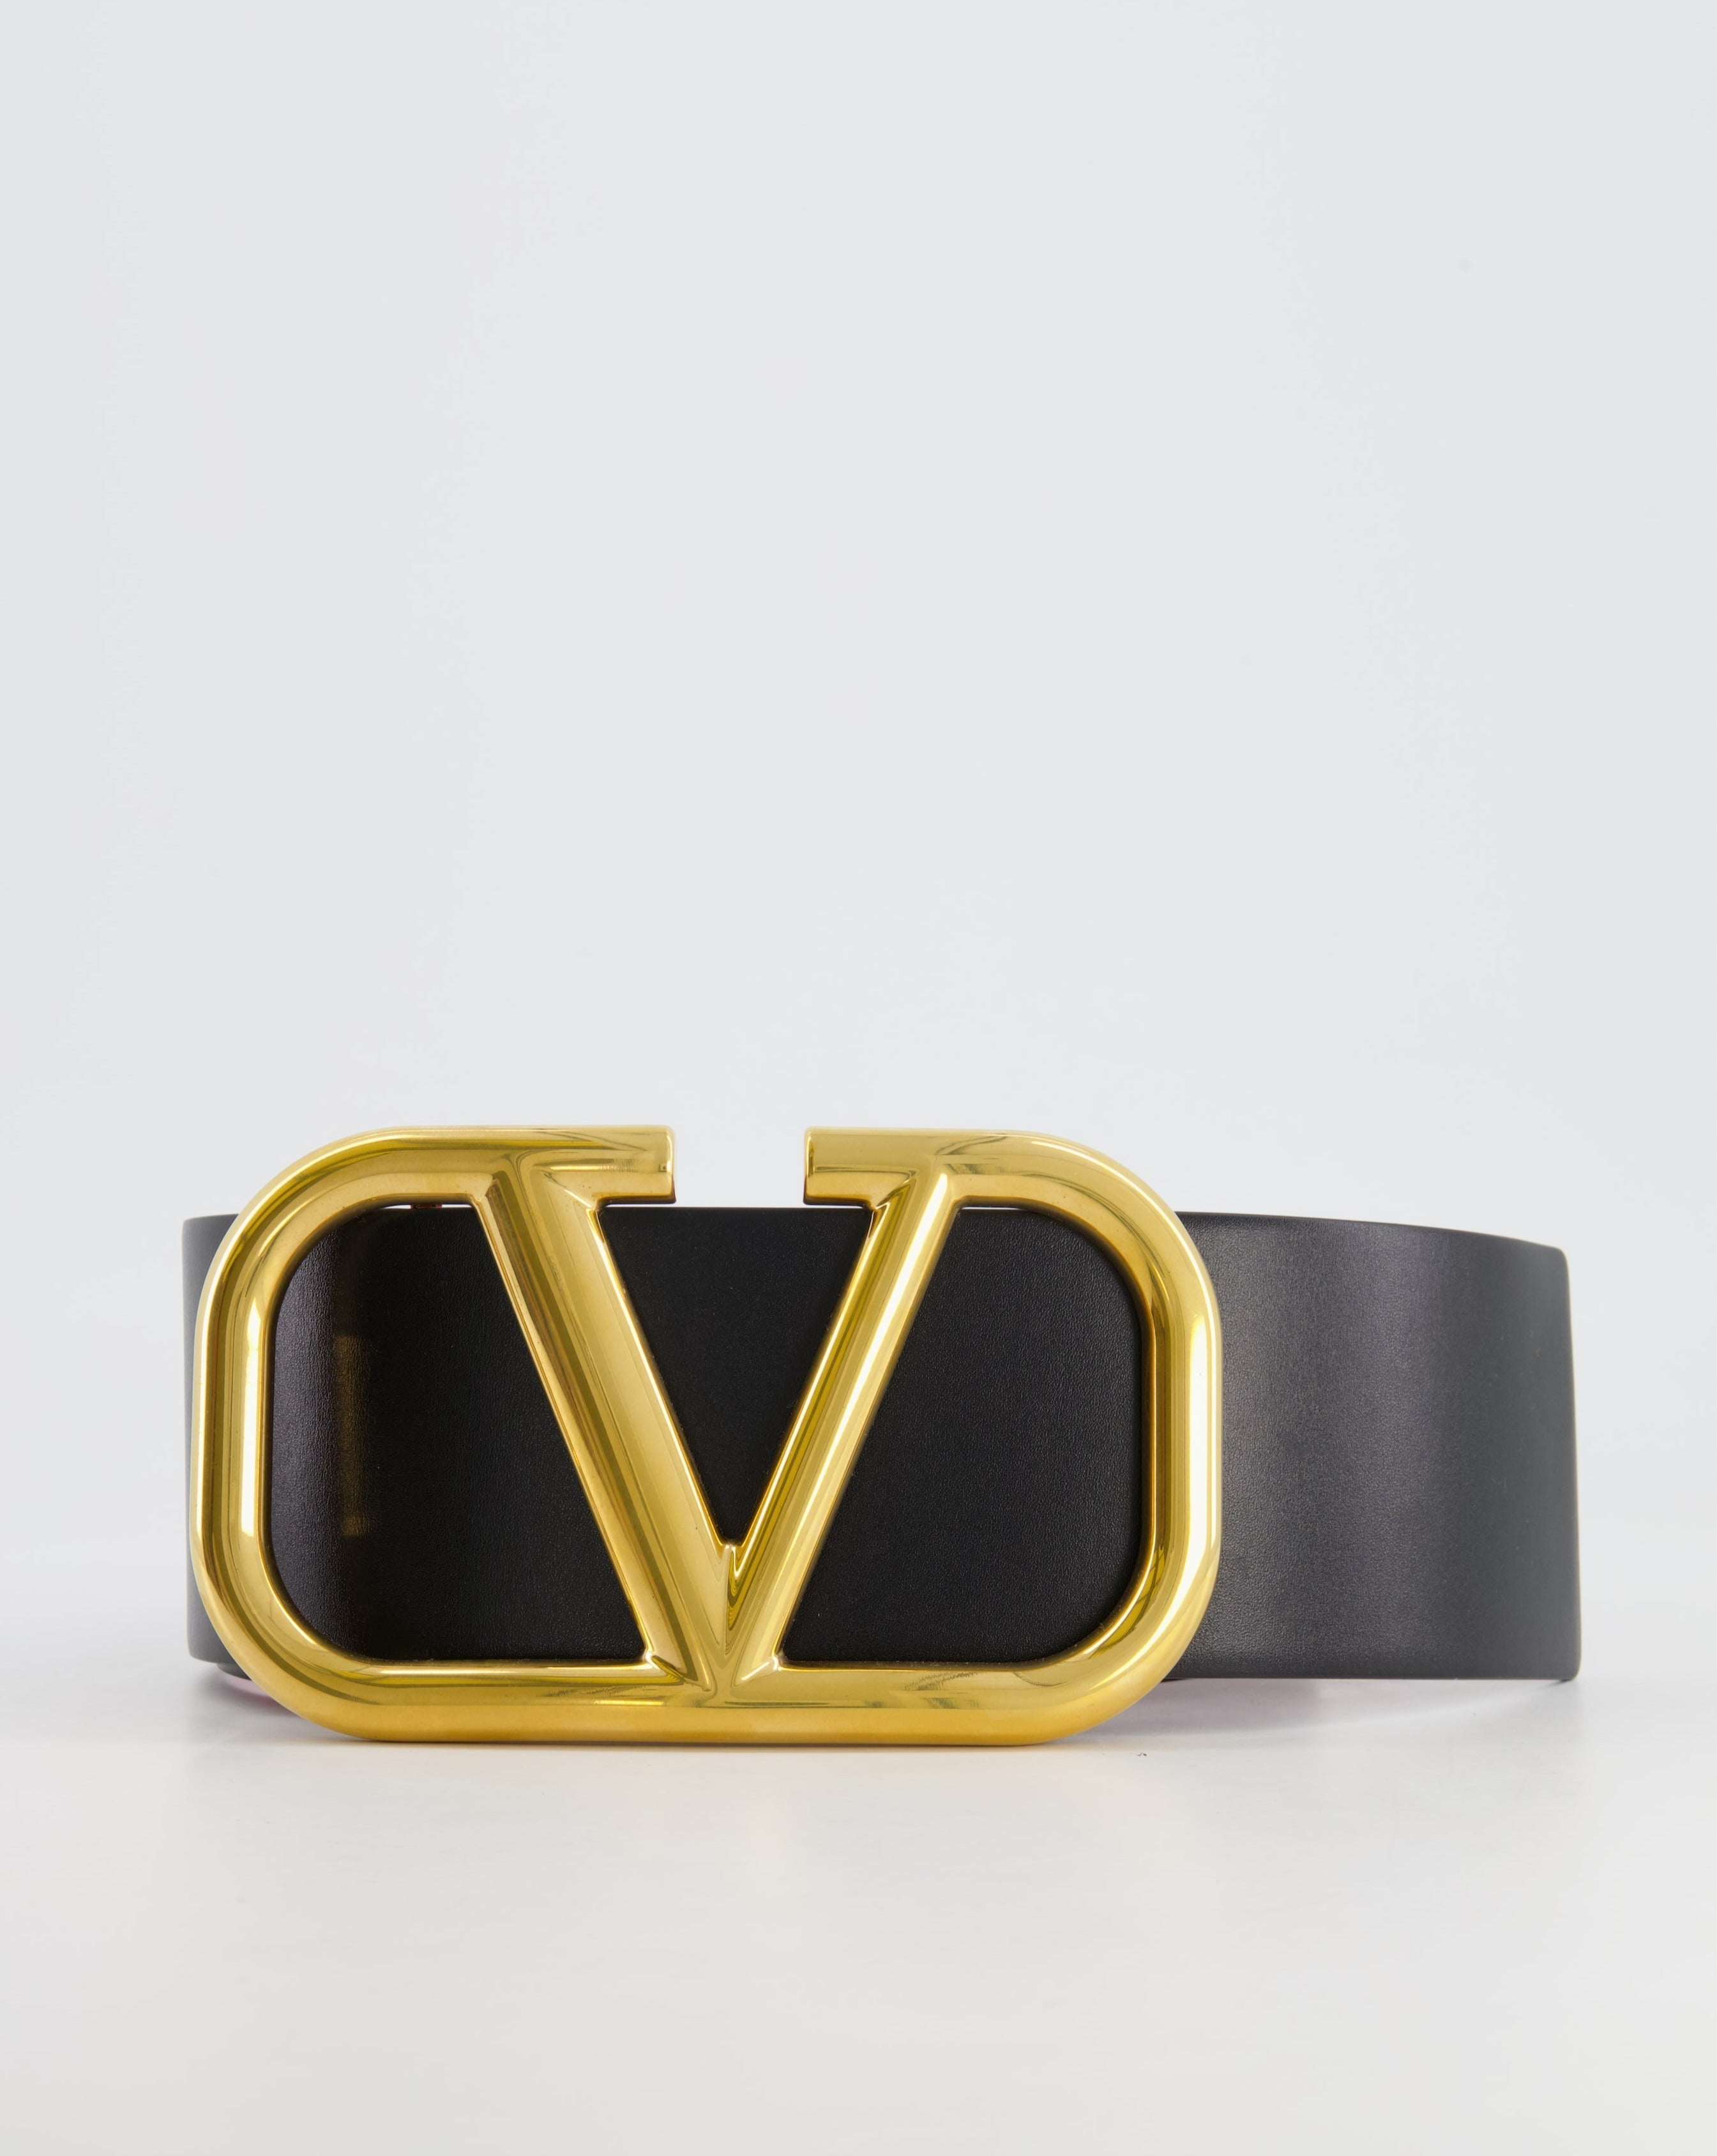 VC 24K Gold Buckle with Red/White Reversible Leather Belt Strap